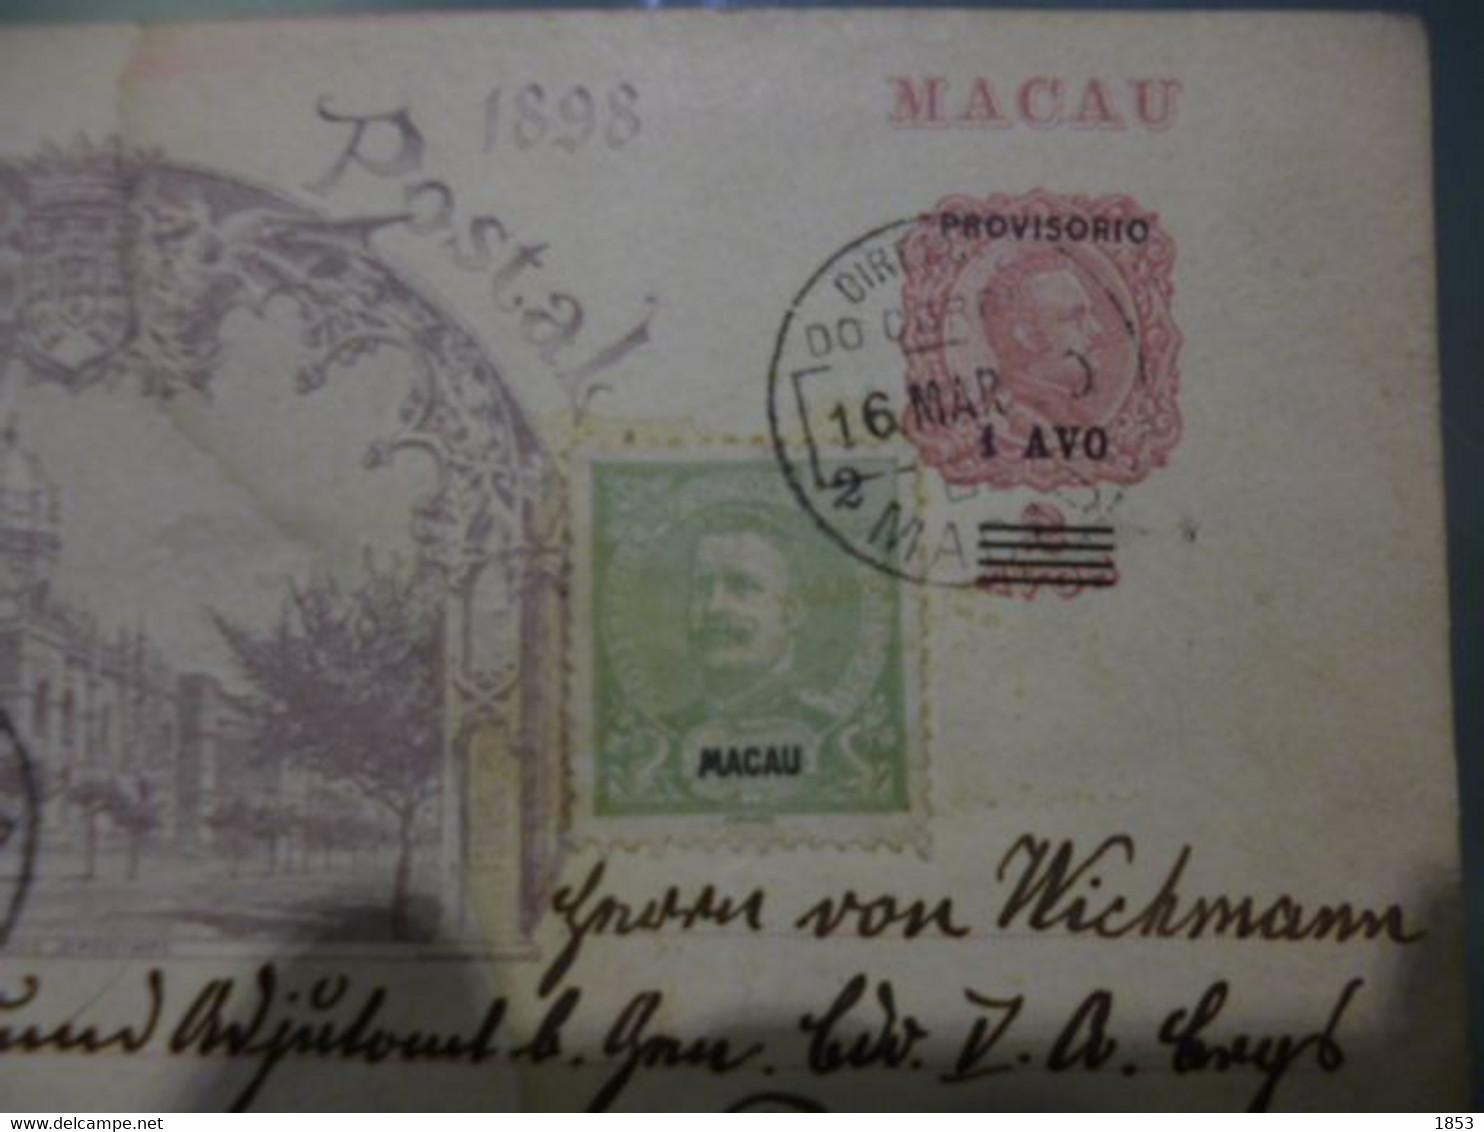 MACAU - STATIONERY - TO POSEN GERMANY - Covers & Documents